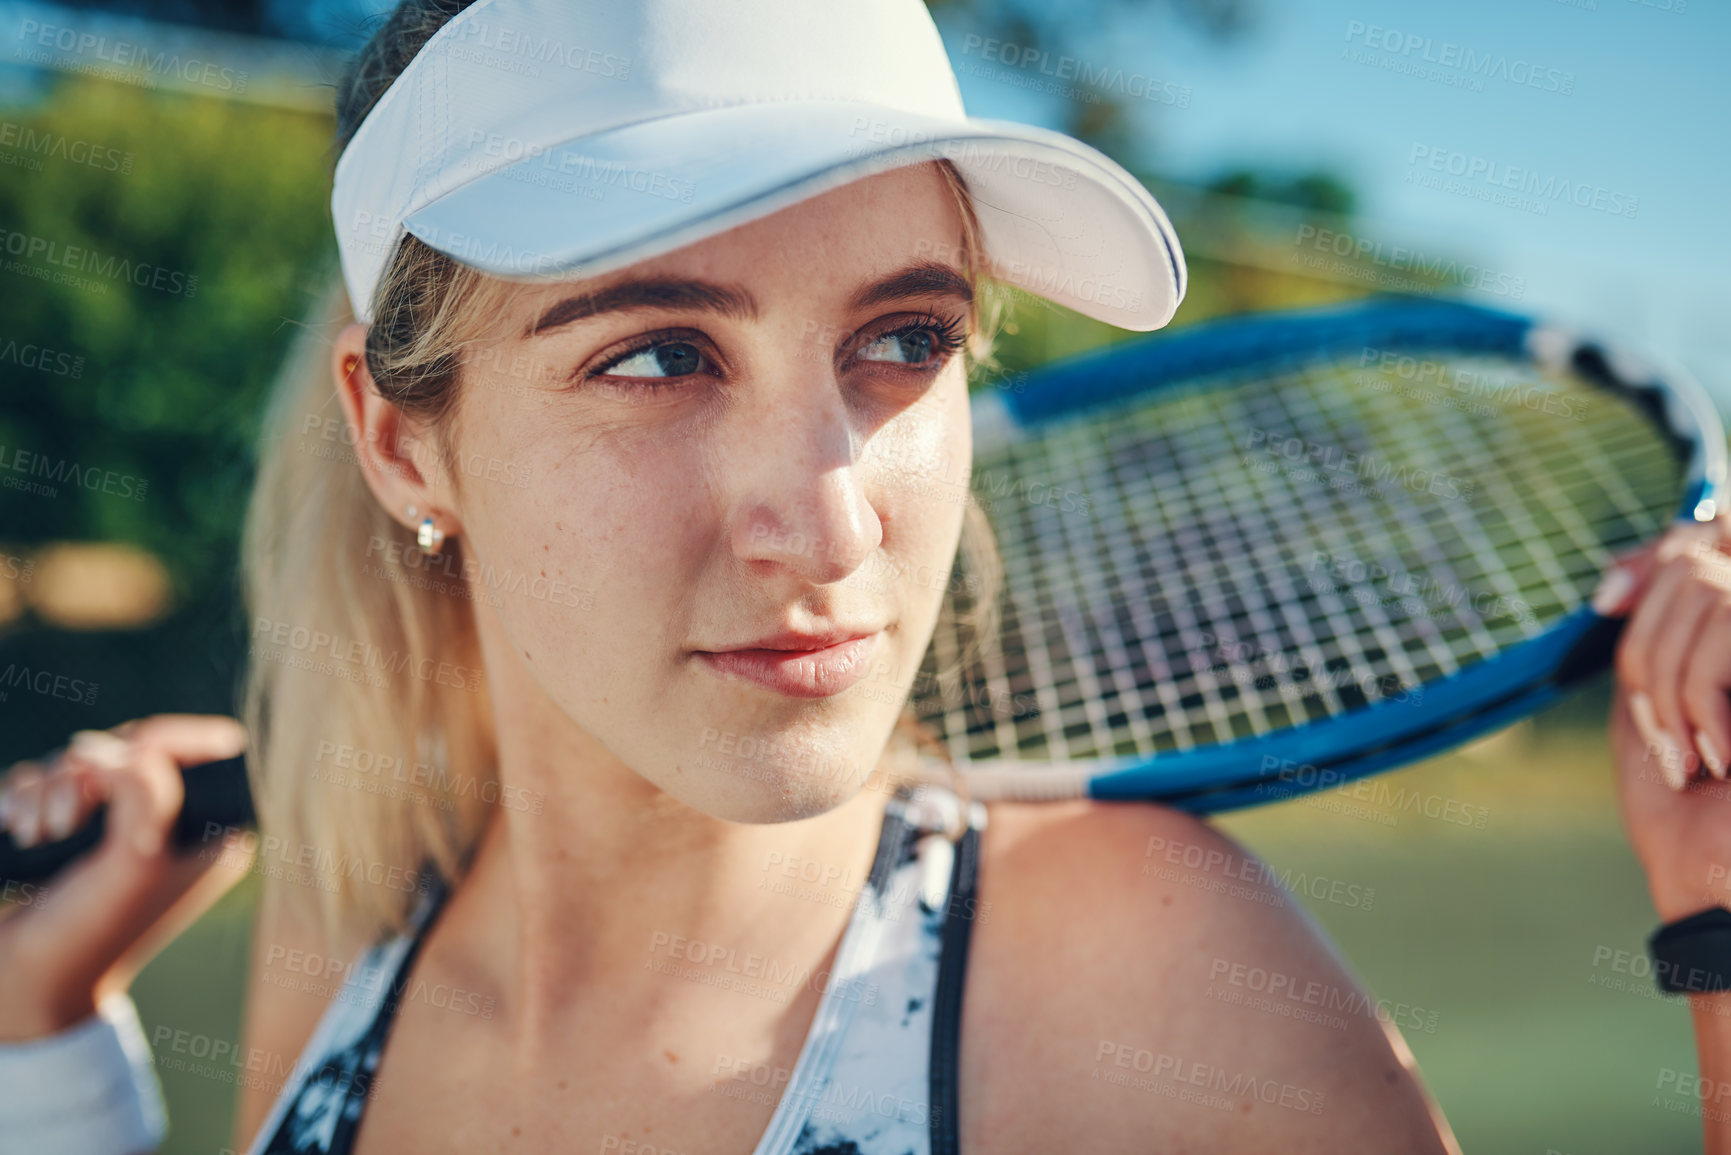 Buy stock photo Shot of a sporty young woman standing on a tennis court with a tennis racket